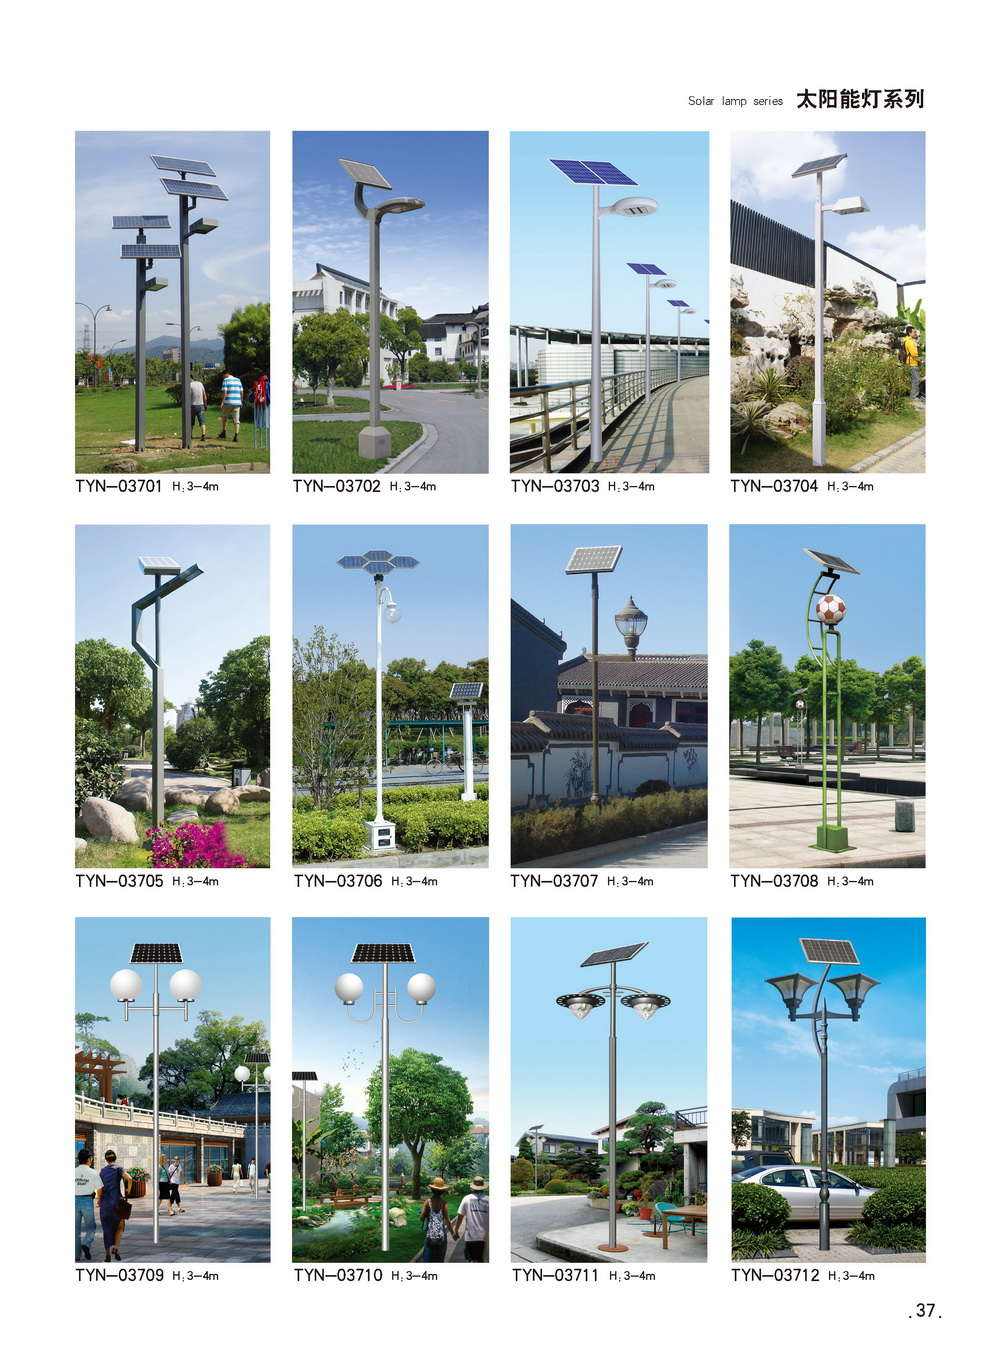 Solar LED Light Source New Gome Professional Street Lamp Manufacturers Support Customization